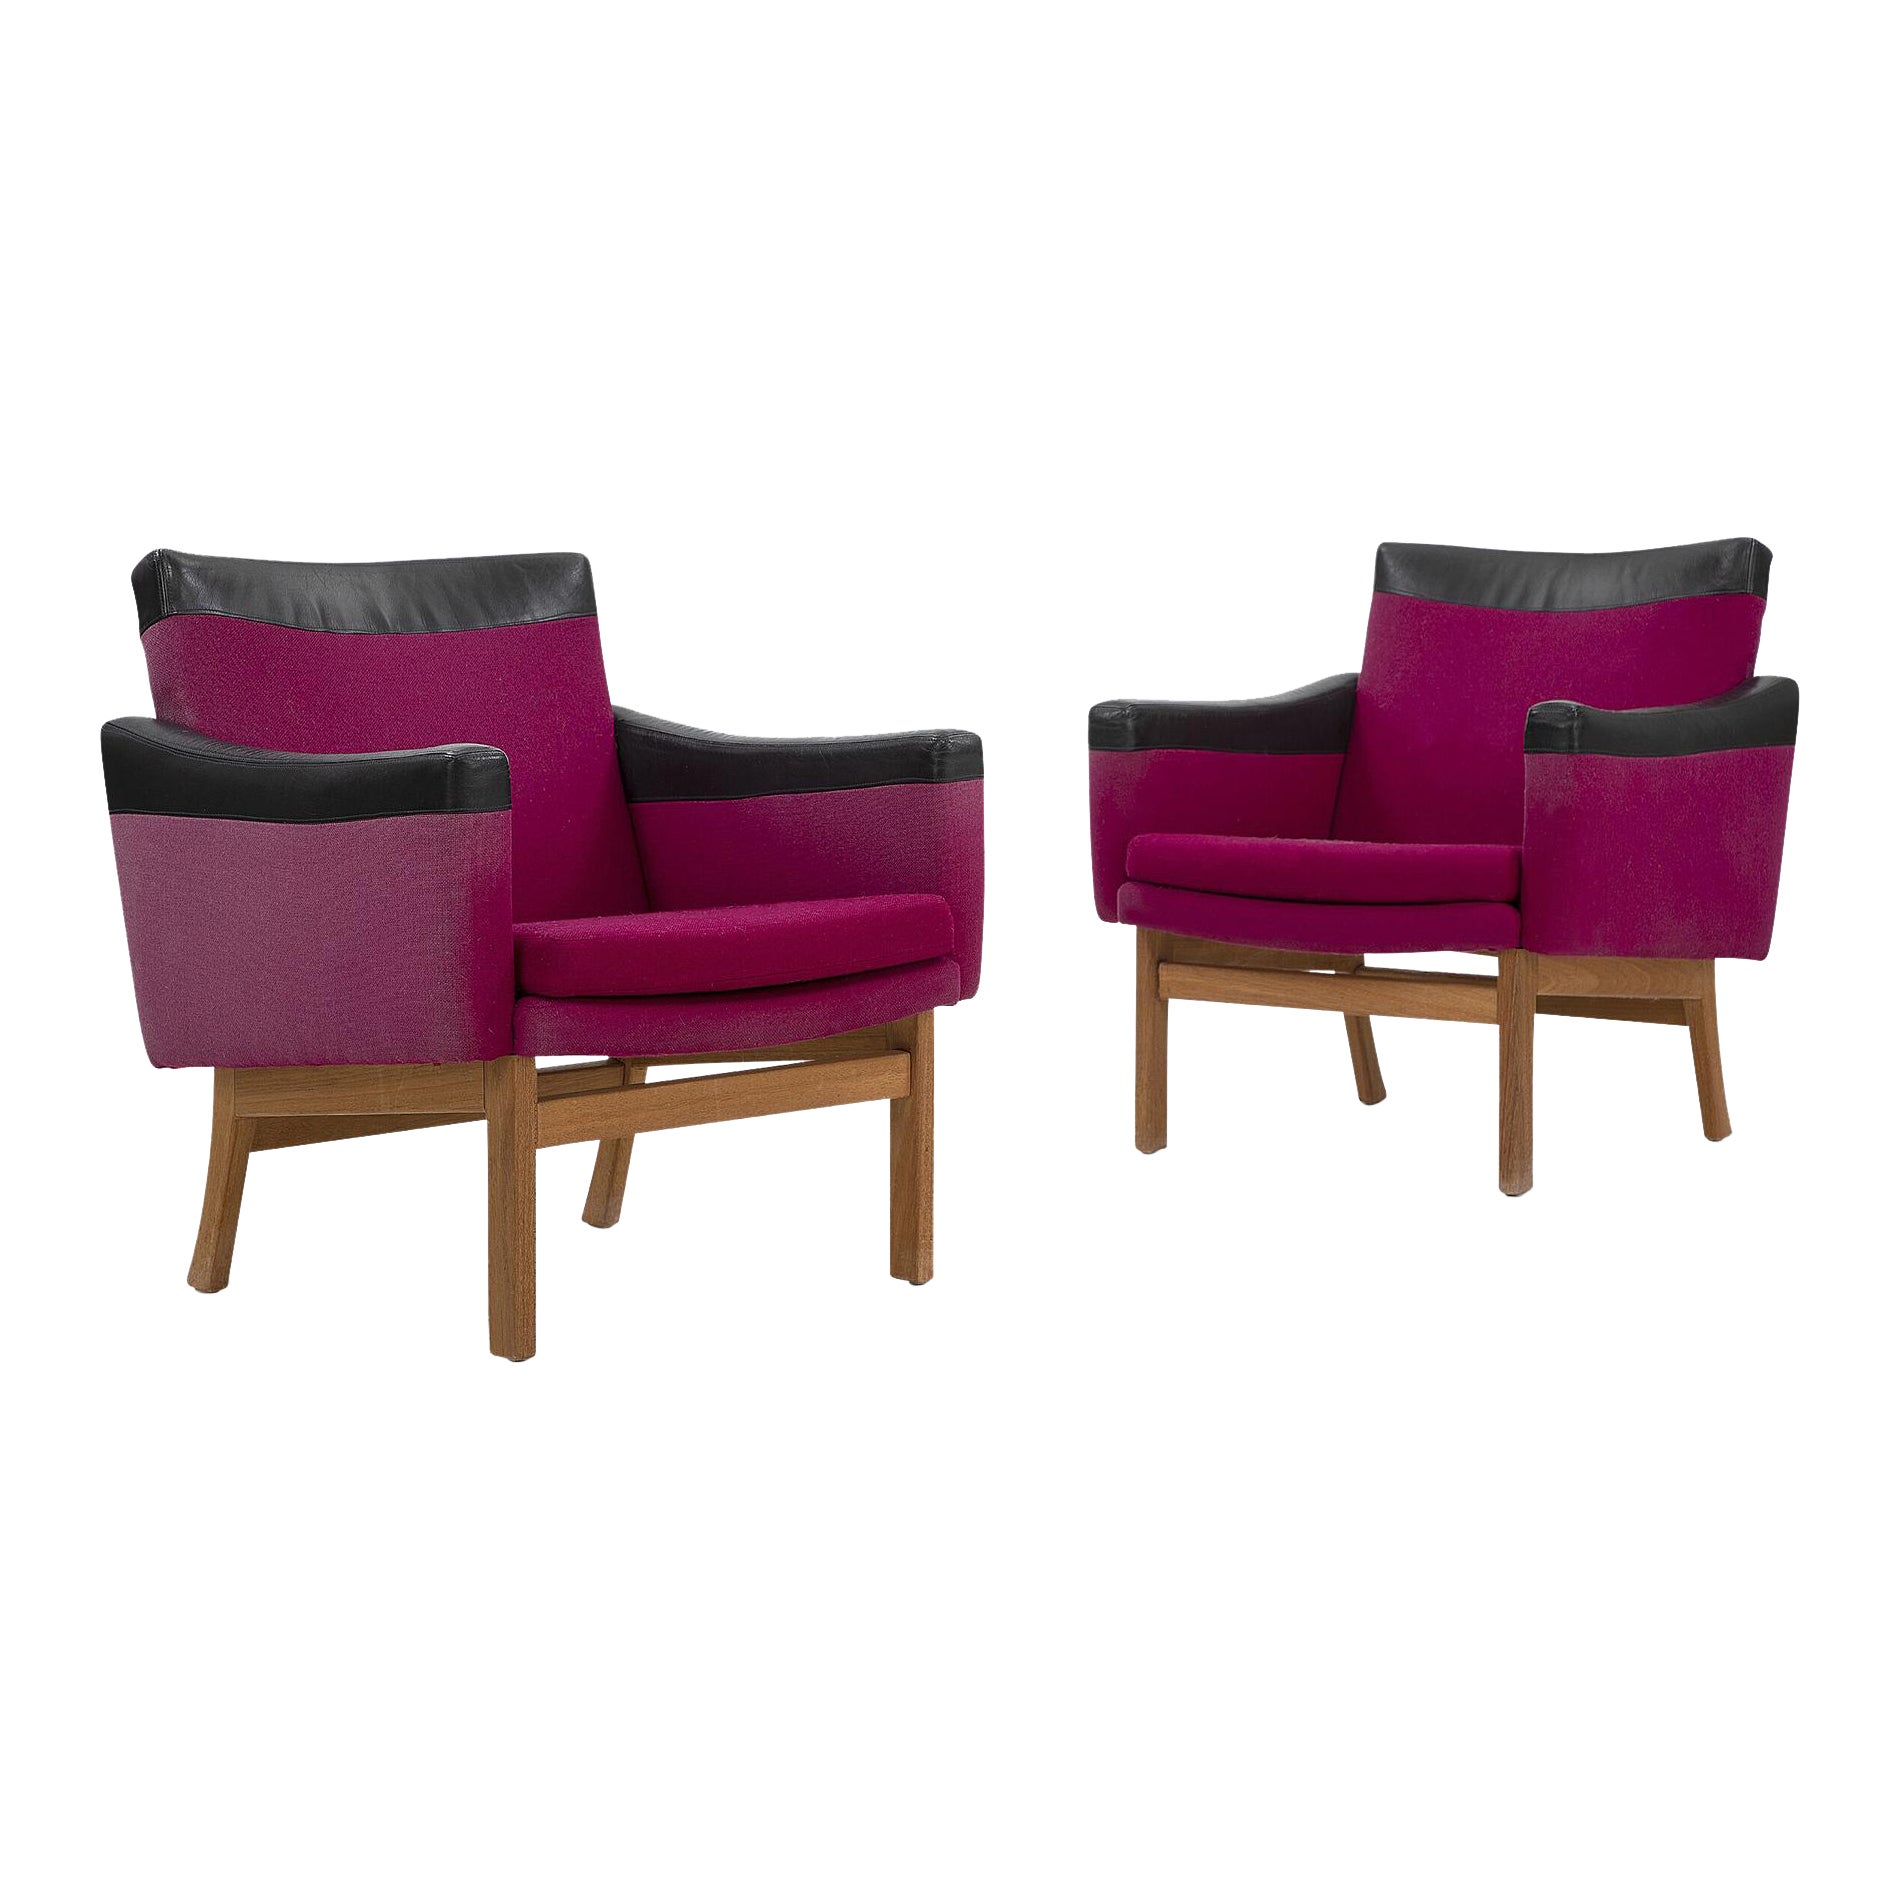 Pair Of Danish Modern Lounge Chairs In Wool + Leather